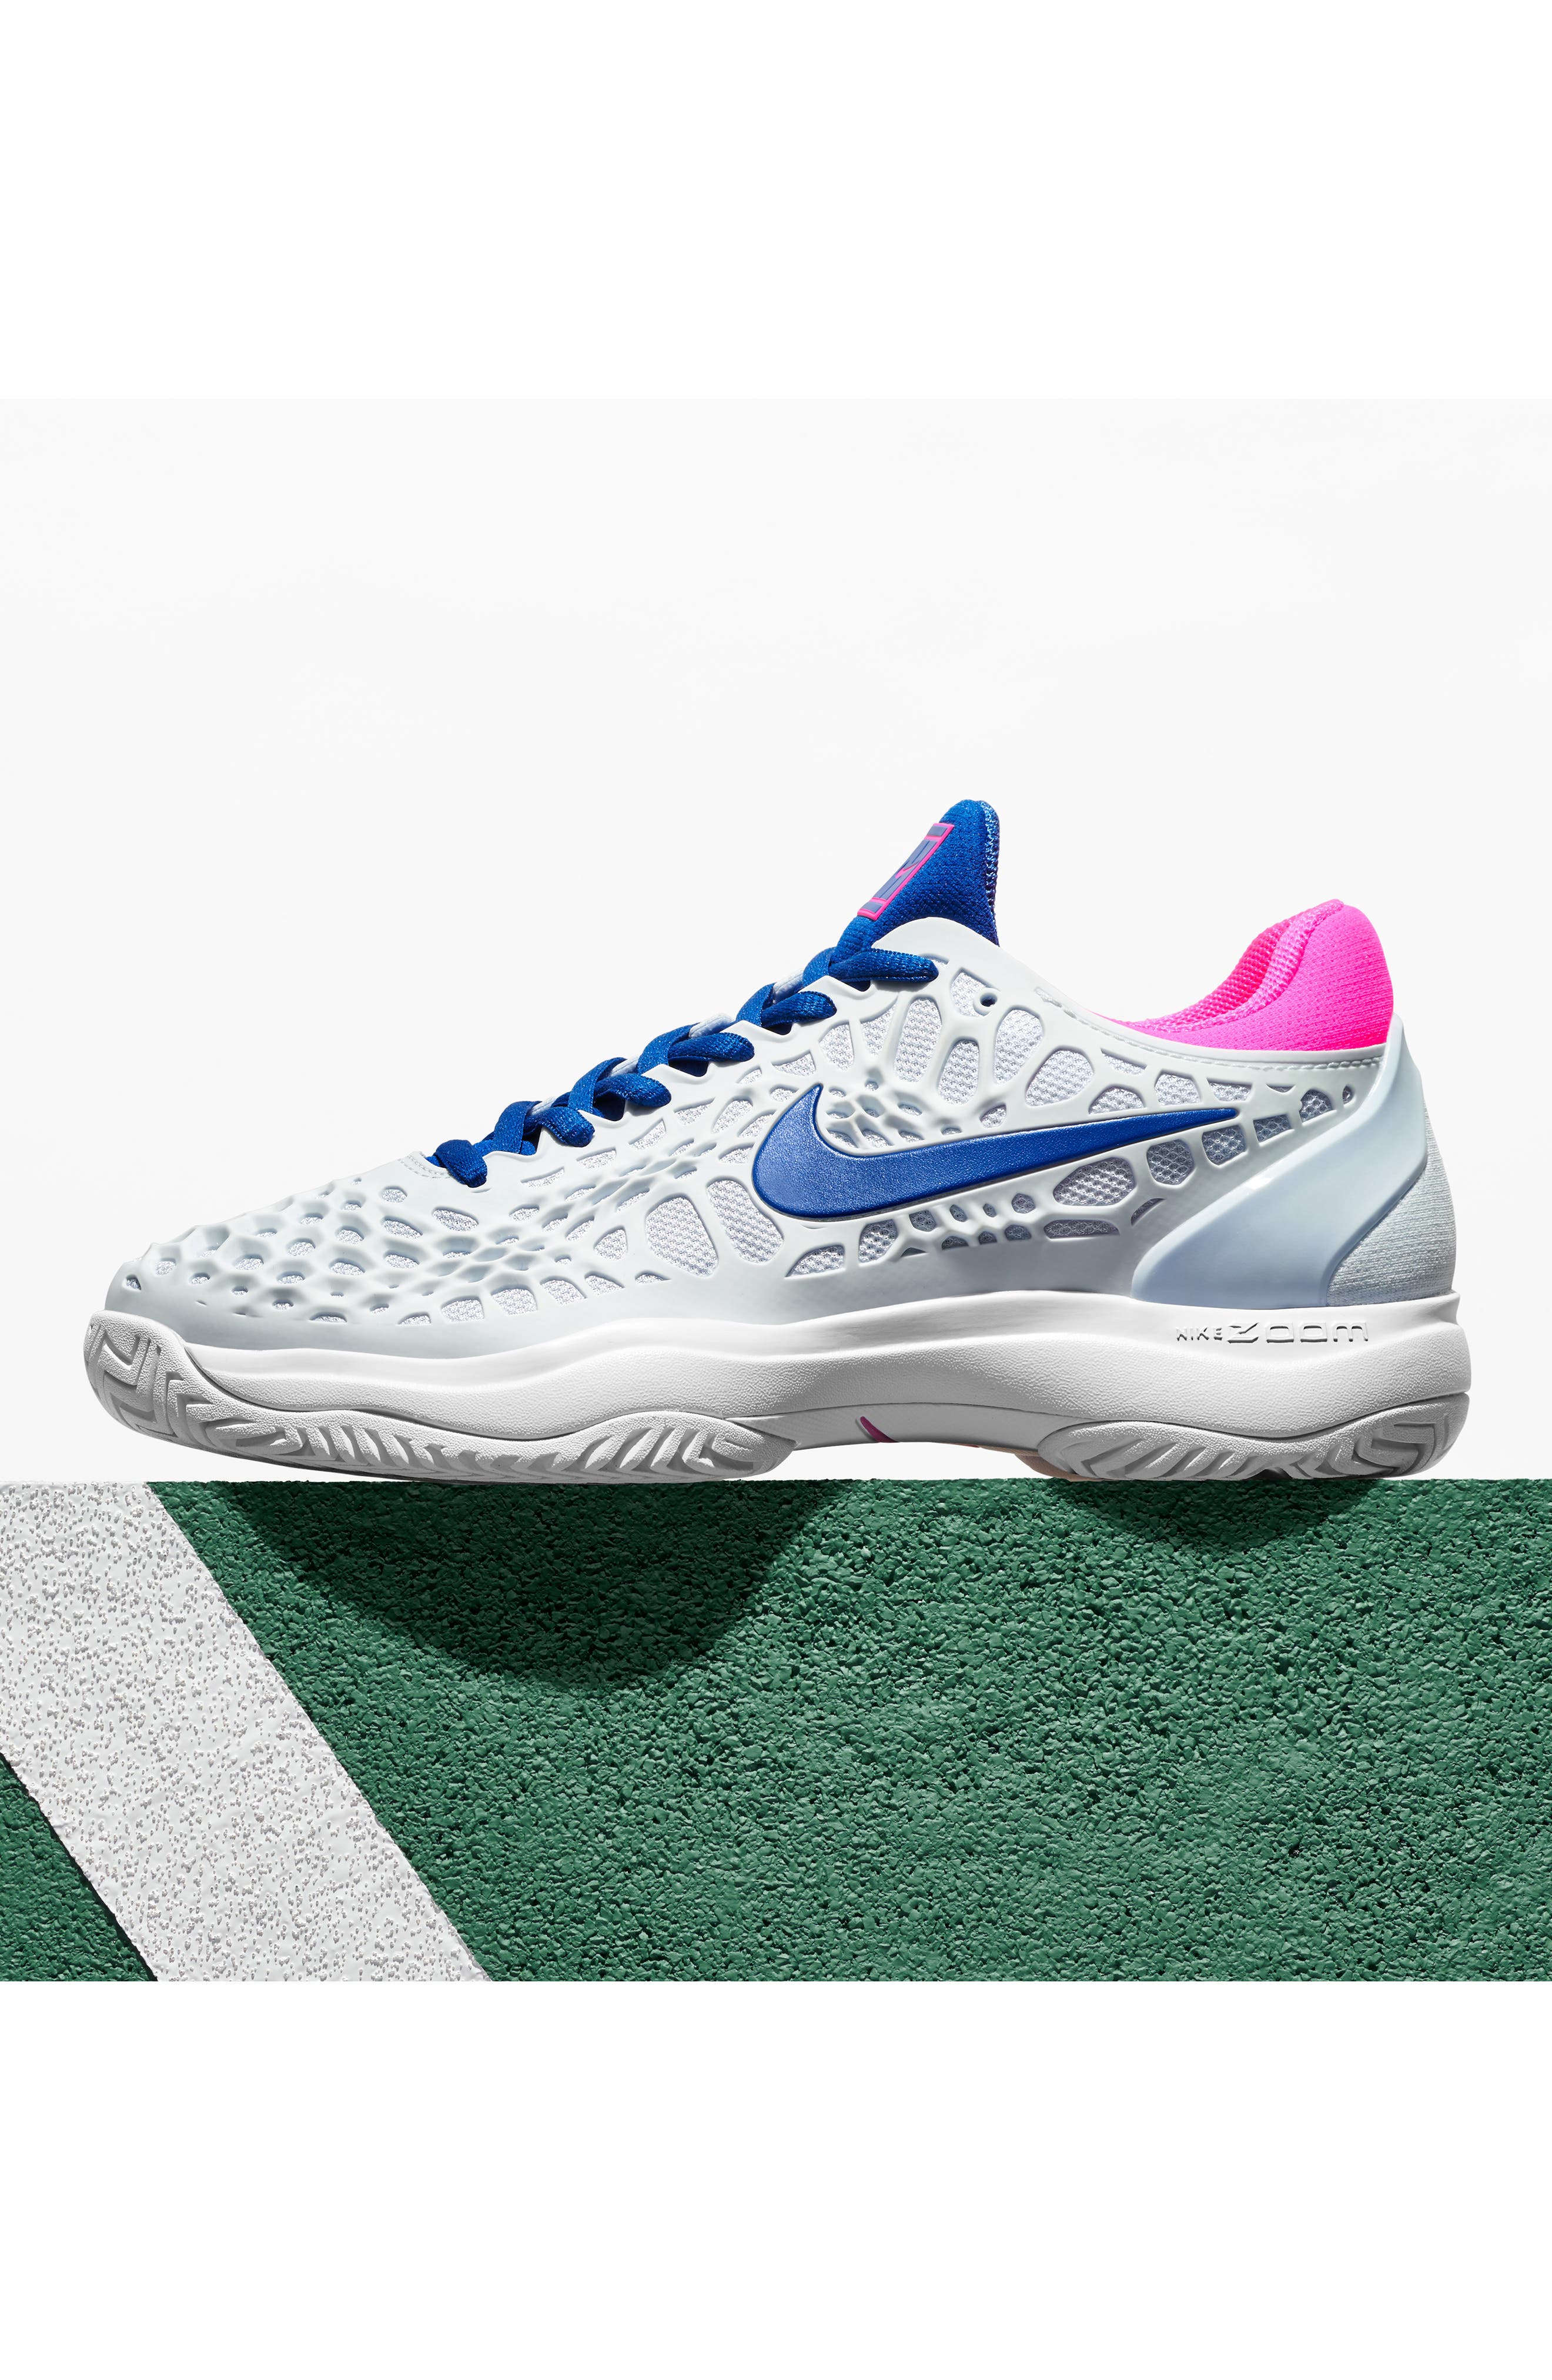 nike air zoom cage 3 hc